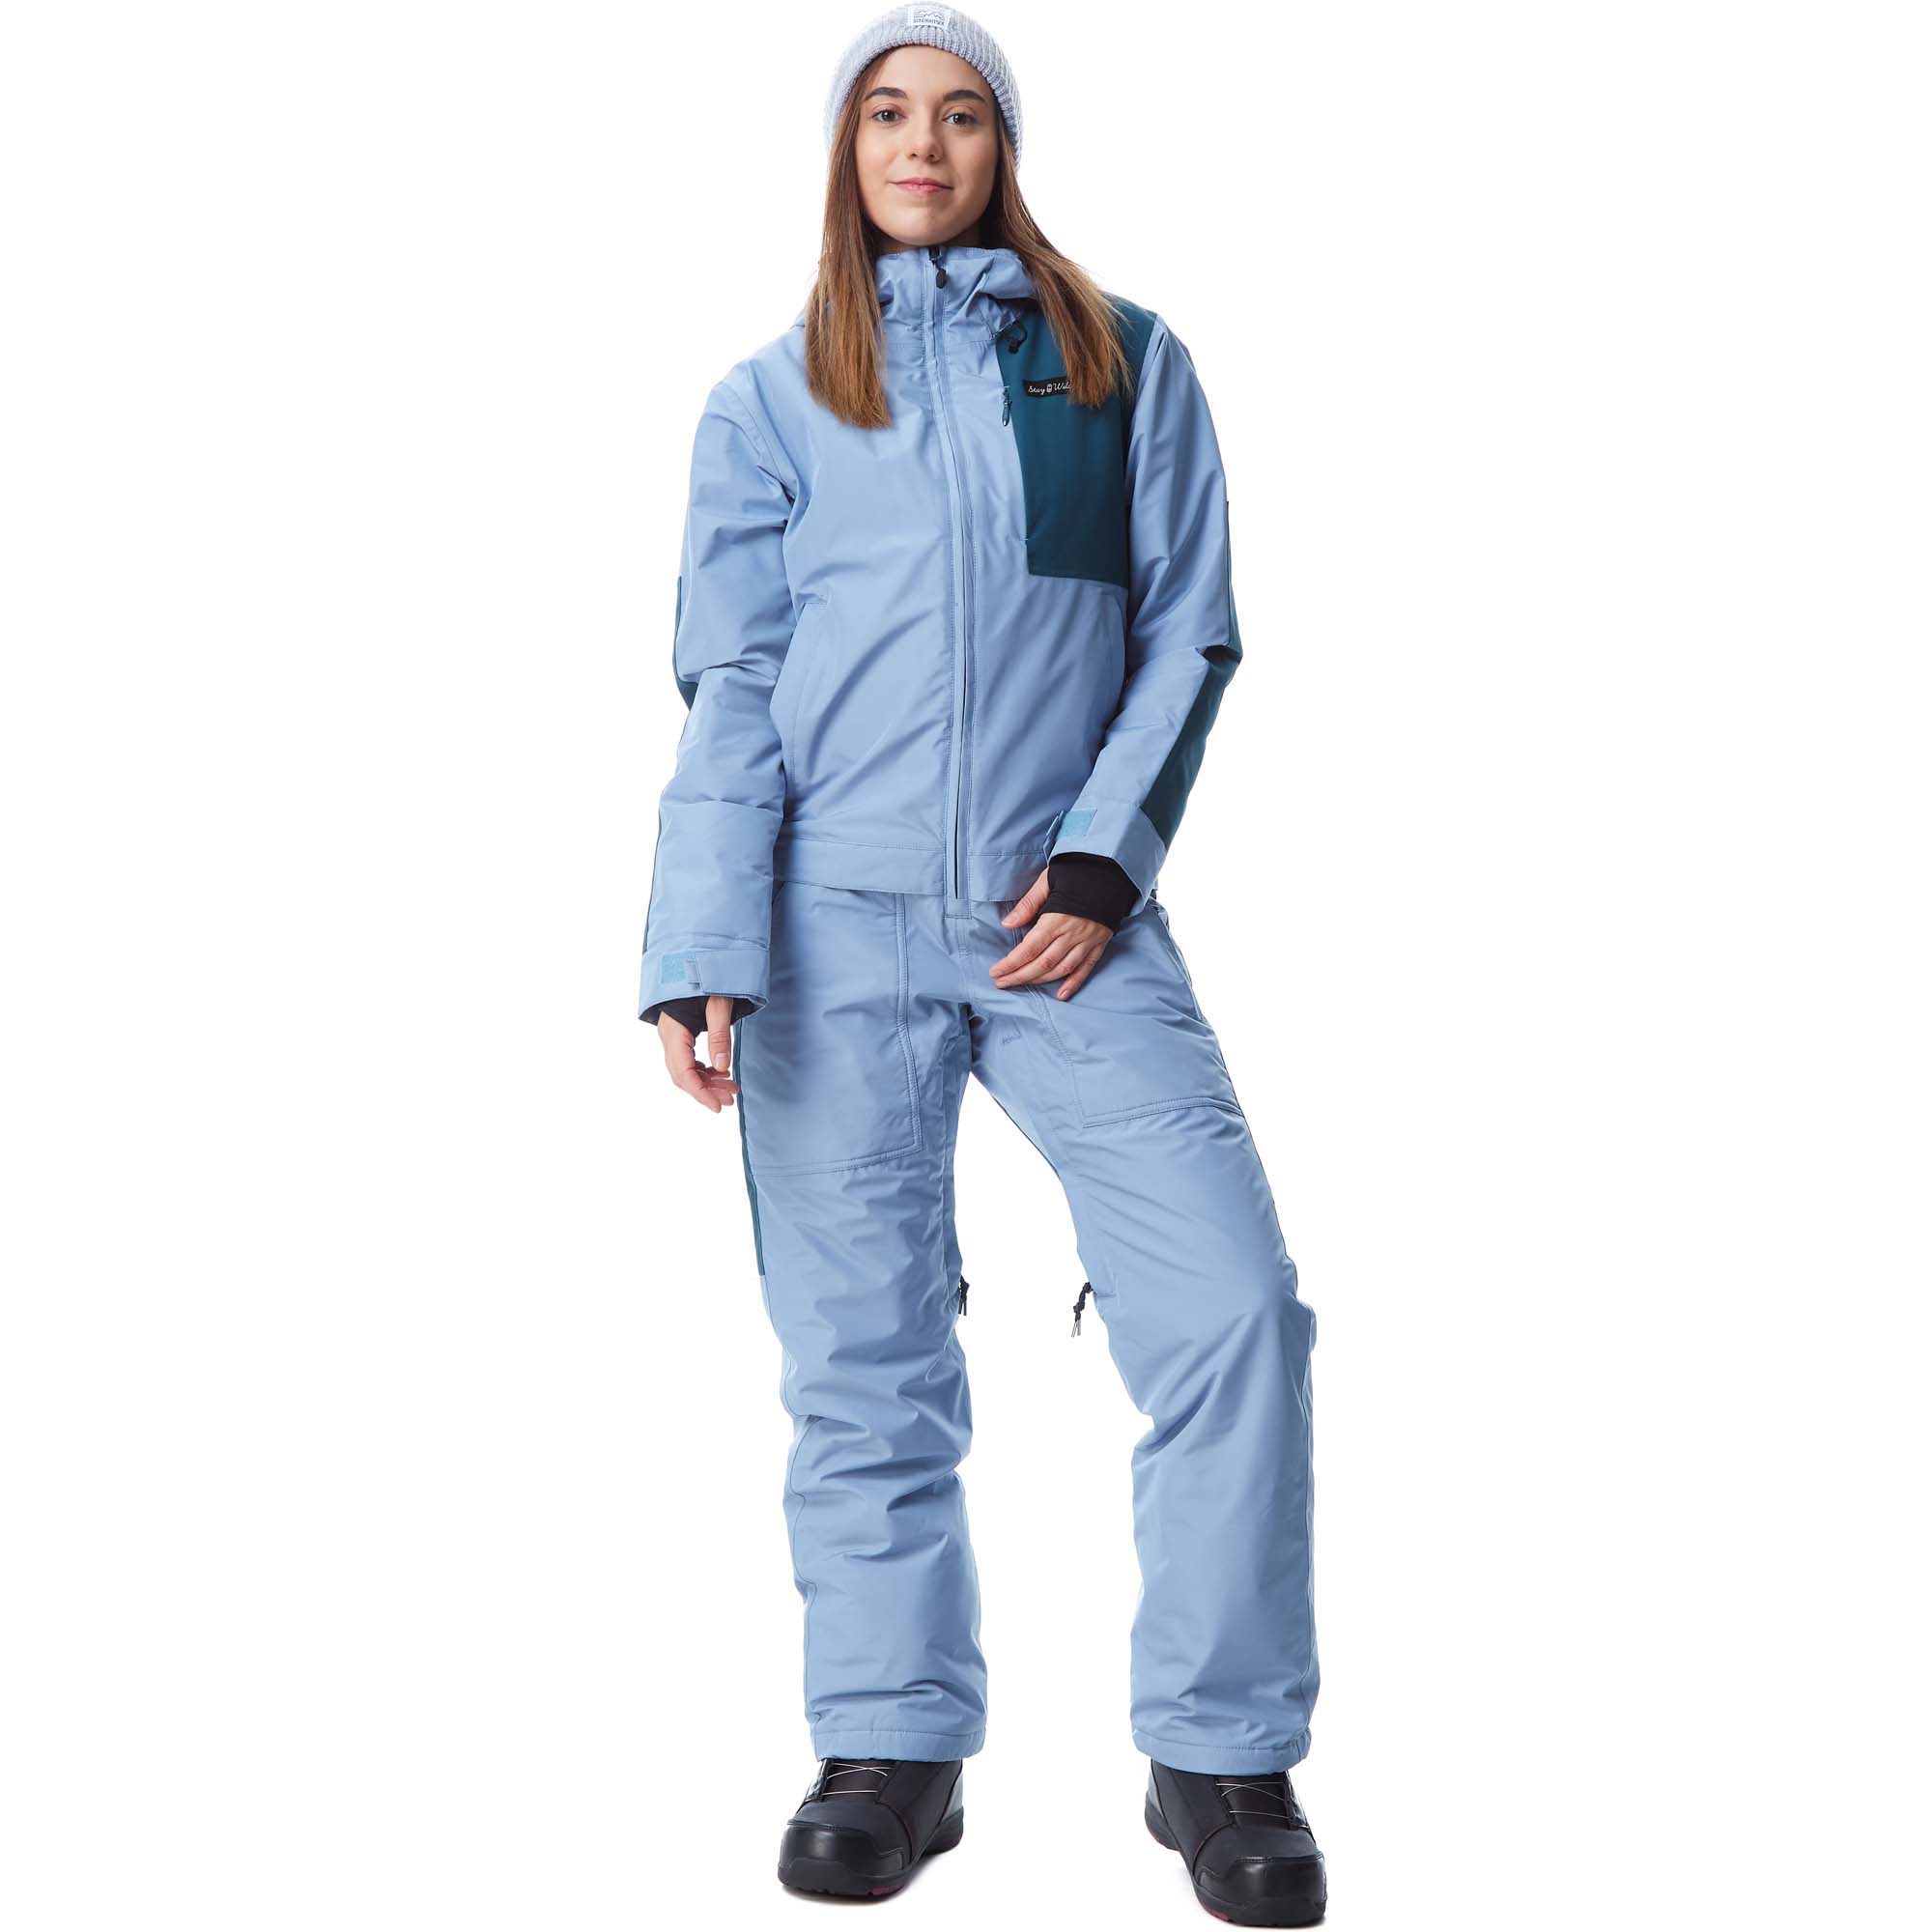 Airblaster Insulated Freedom Women's Snowboard Suit